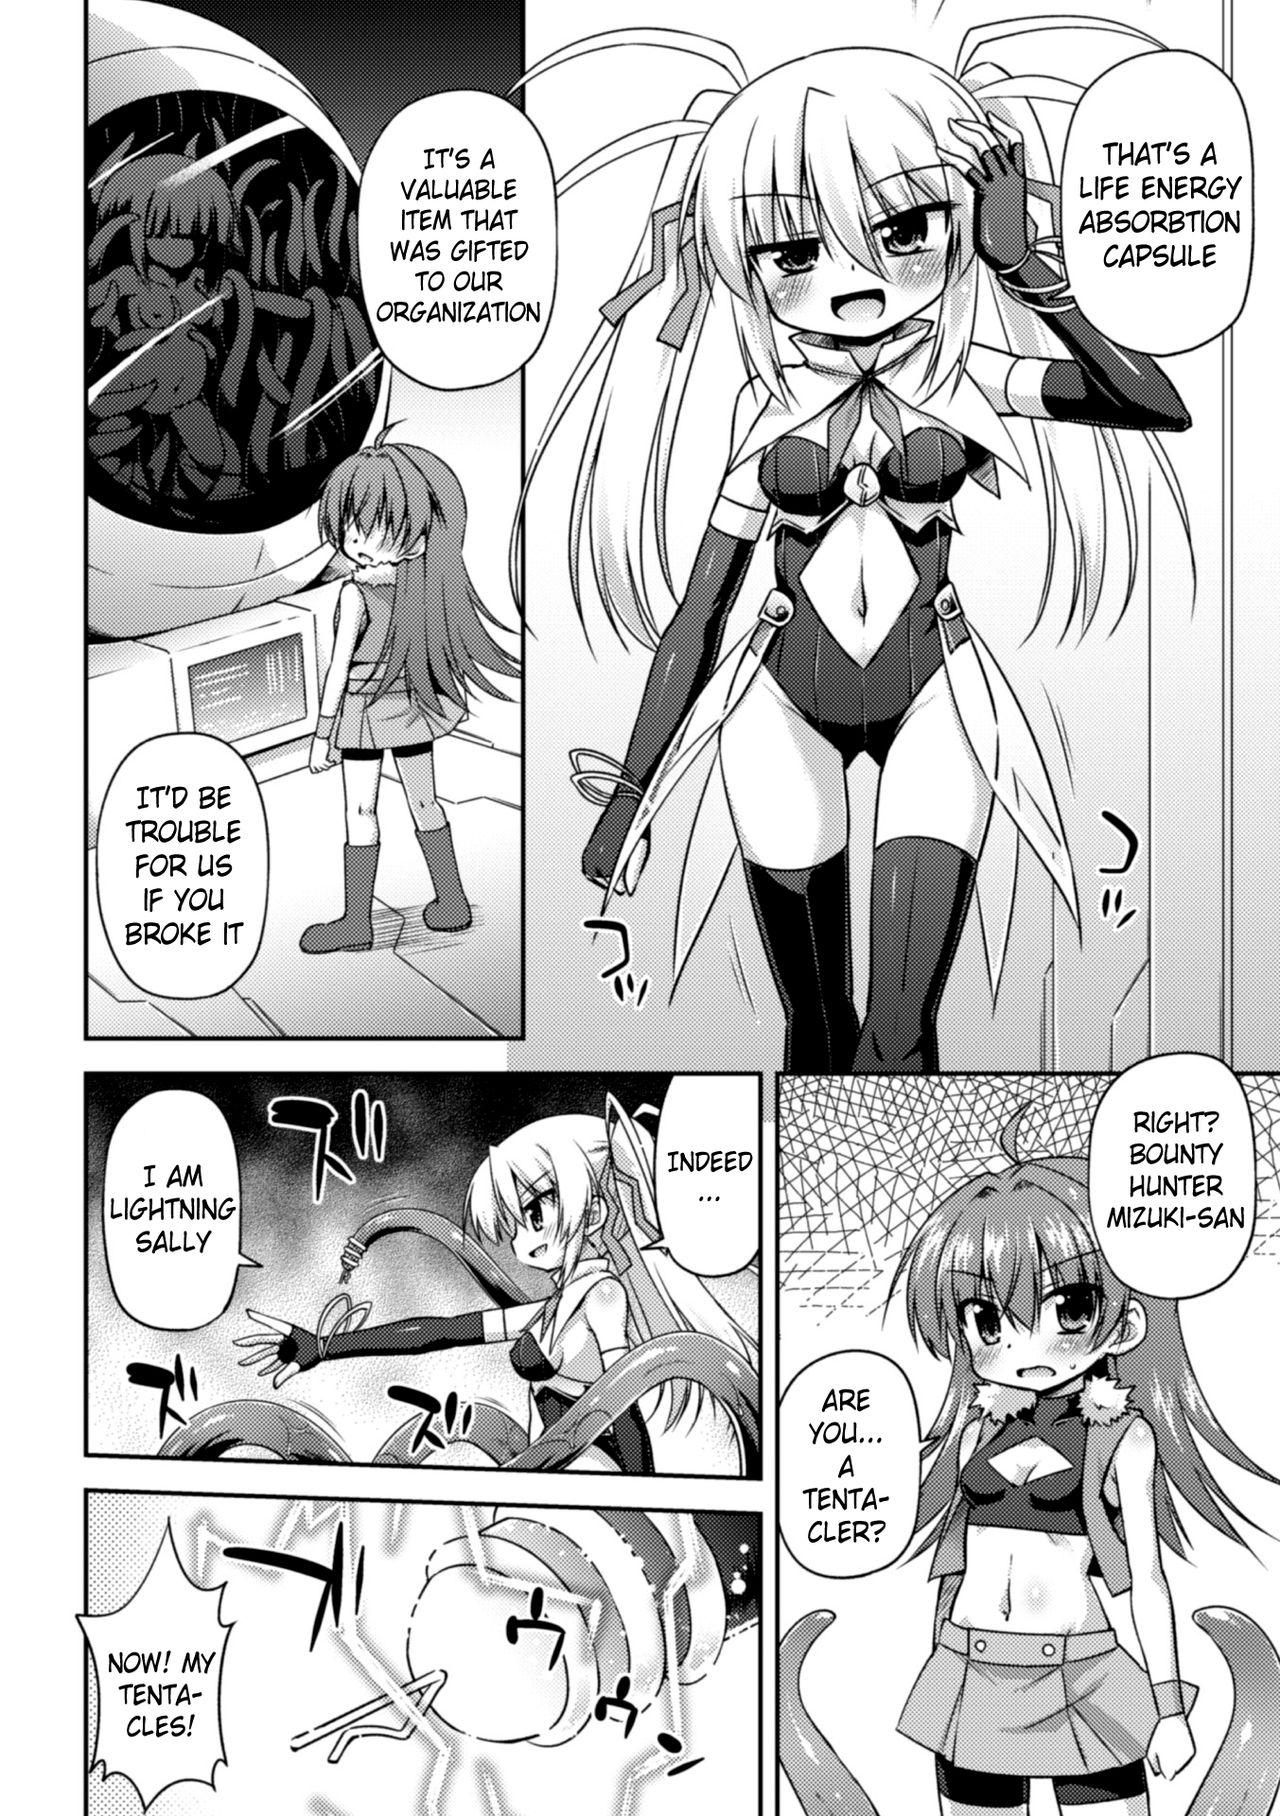 Cock Suckers Konoyo wa Subete Tentacle! | This World is all Tentacles! Passion - Page 8